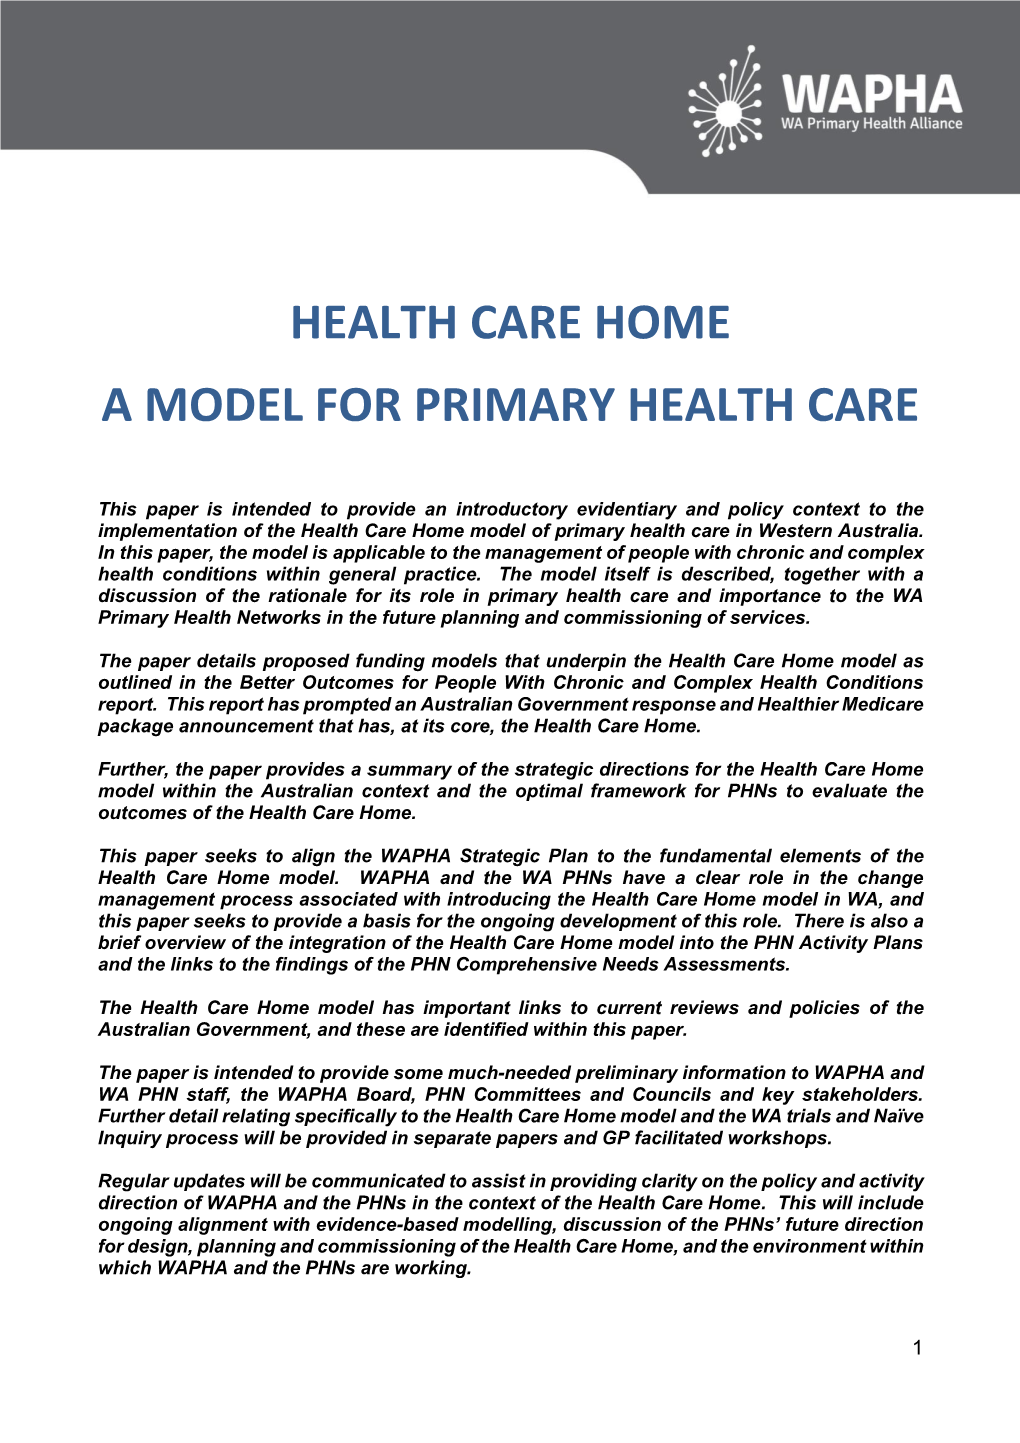 Health Care Home a Model for Primary Health Care